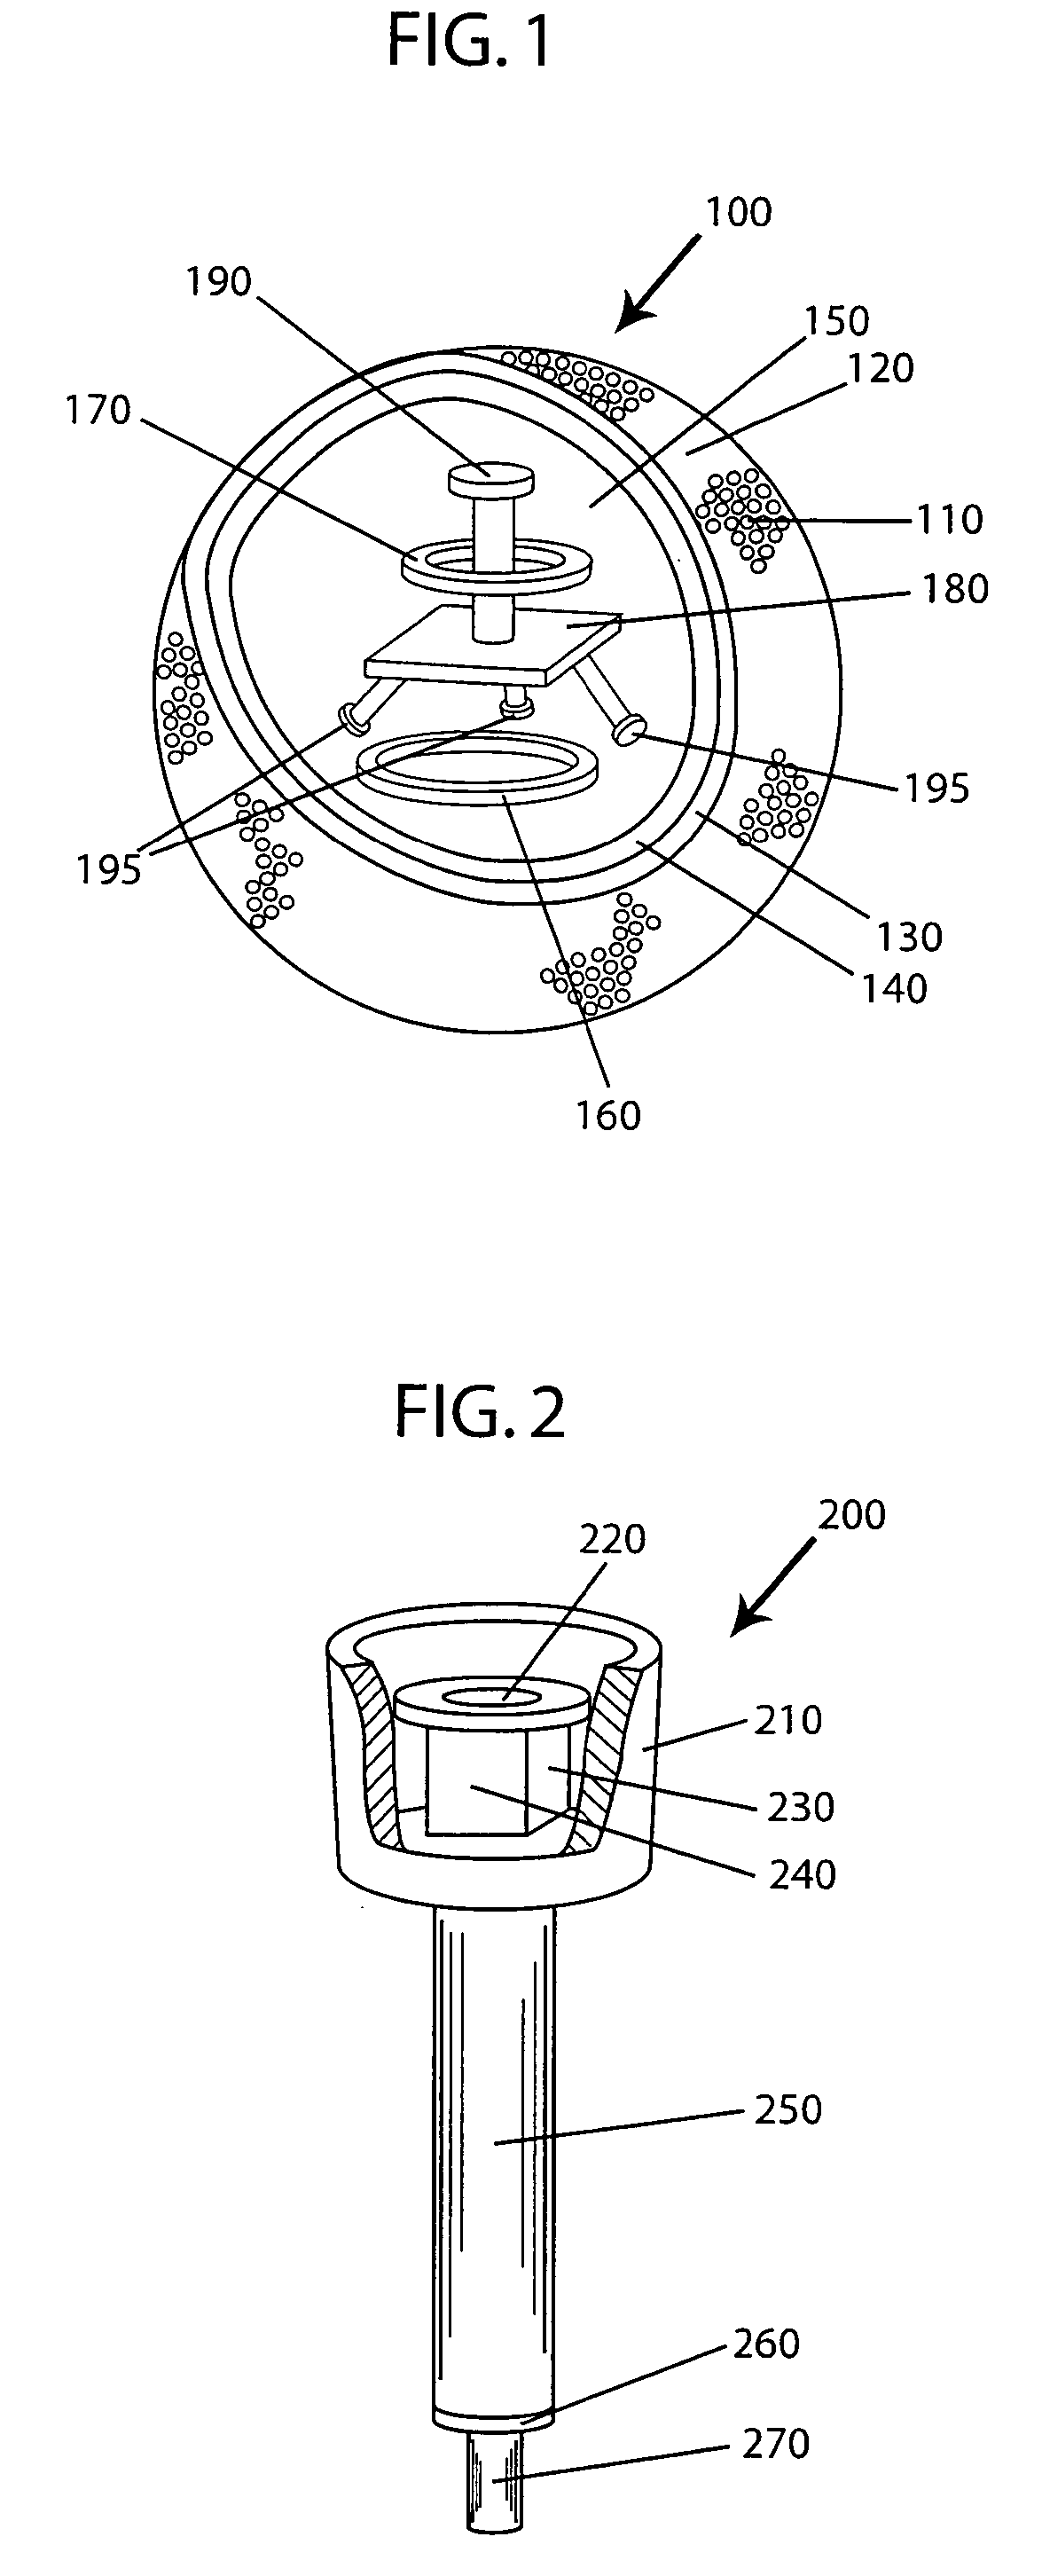 Virtual golf training and gaming system and method